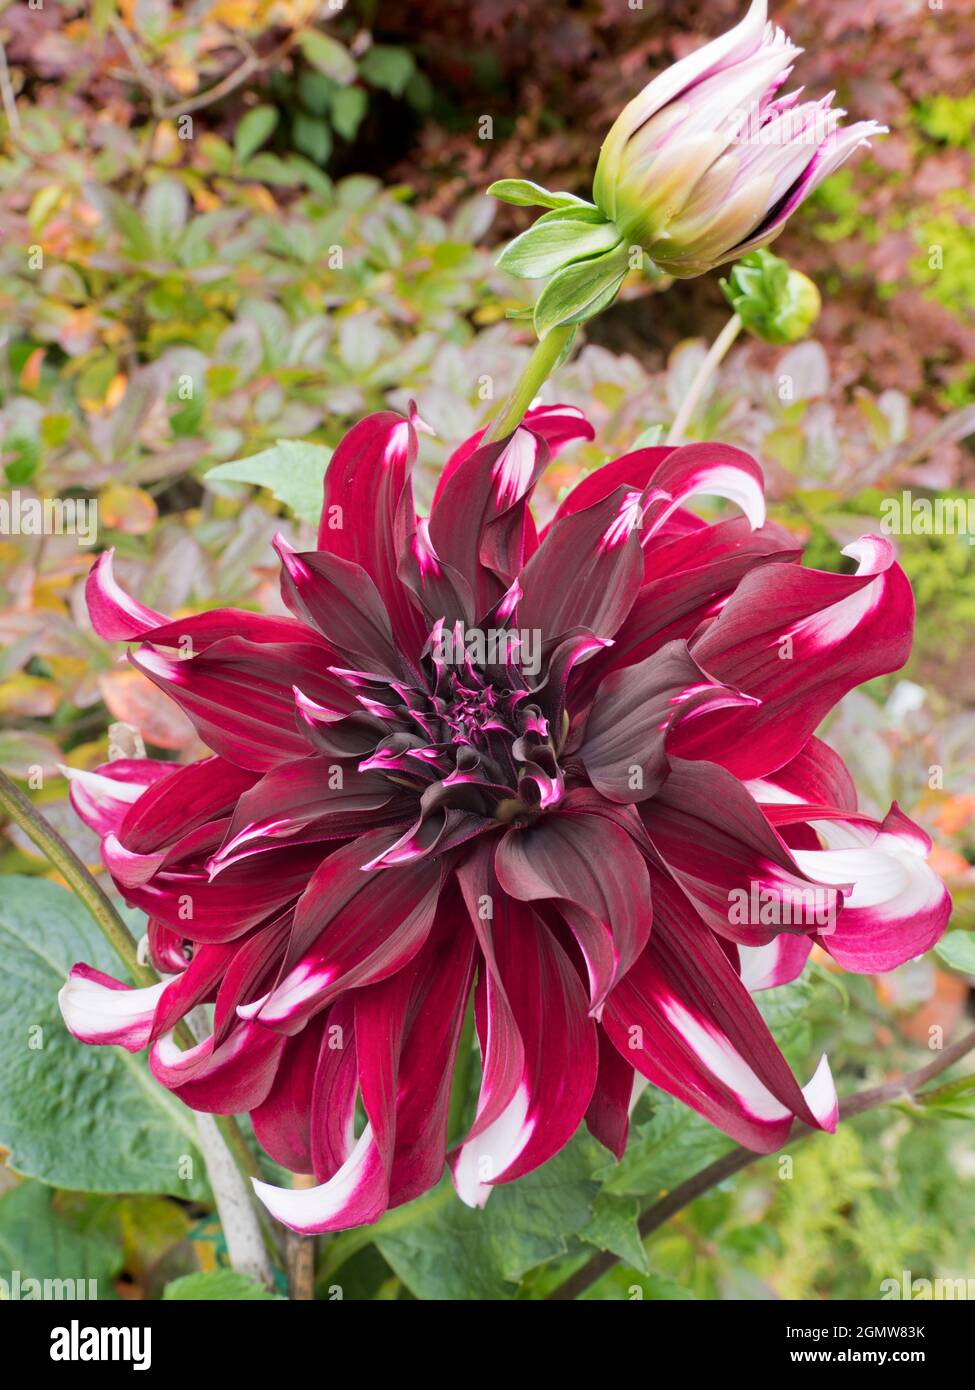 Radley, Oxfordshire, England - 8 September 2019     Dahlias put on a fine show in our garden, in Radley Village Oxfordshire, usually during late summe Stock Photo